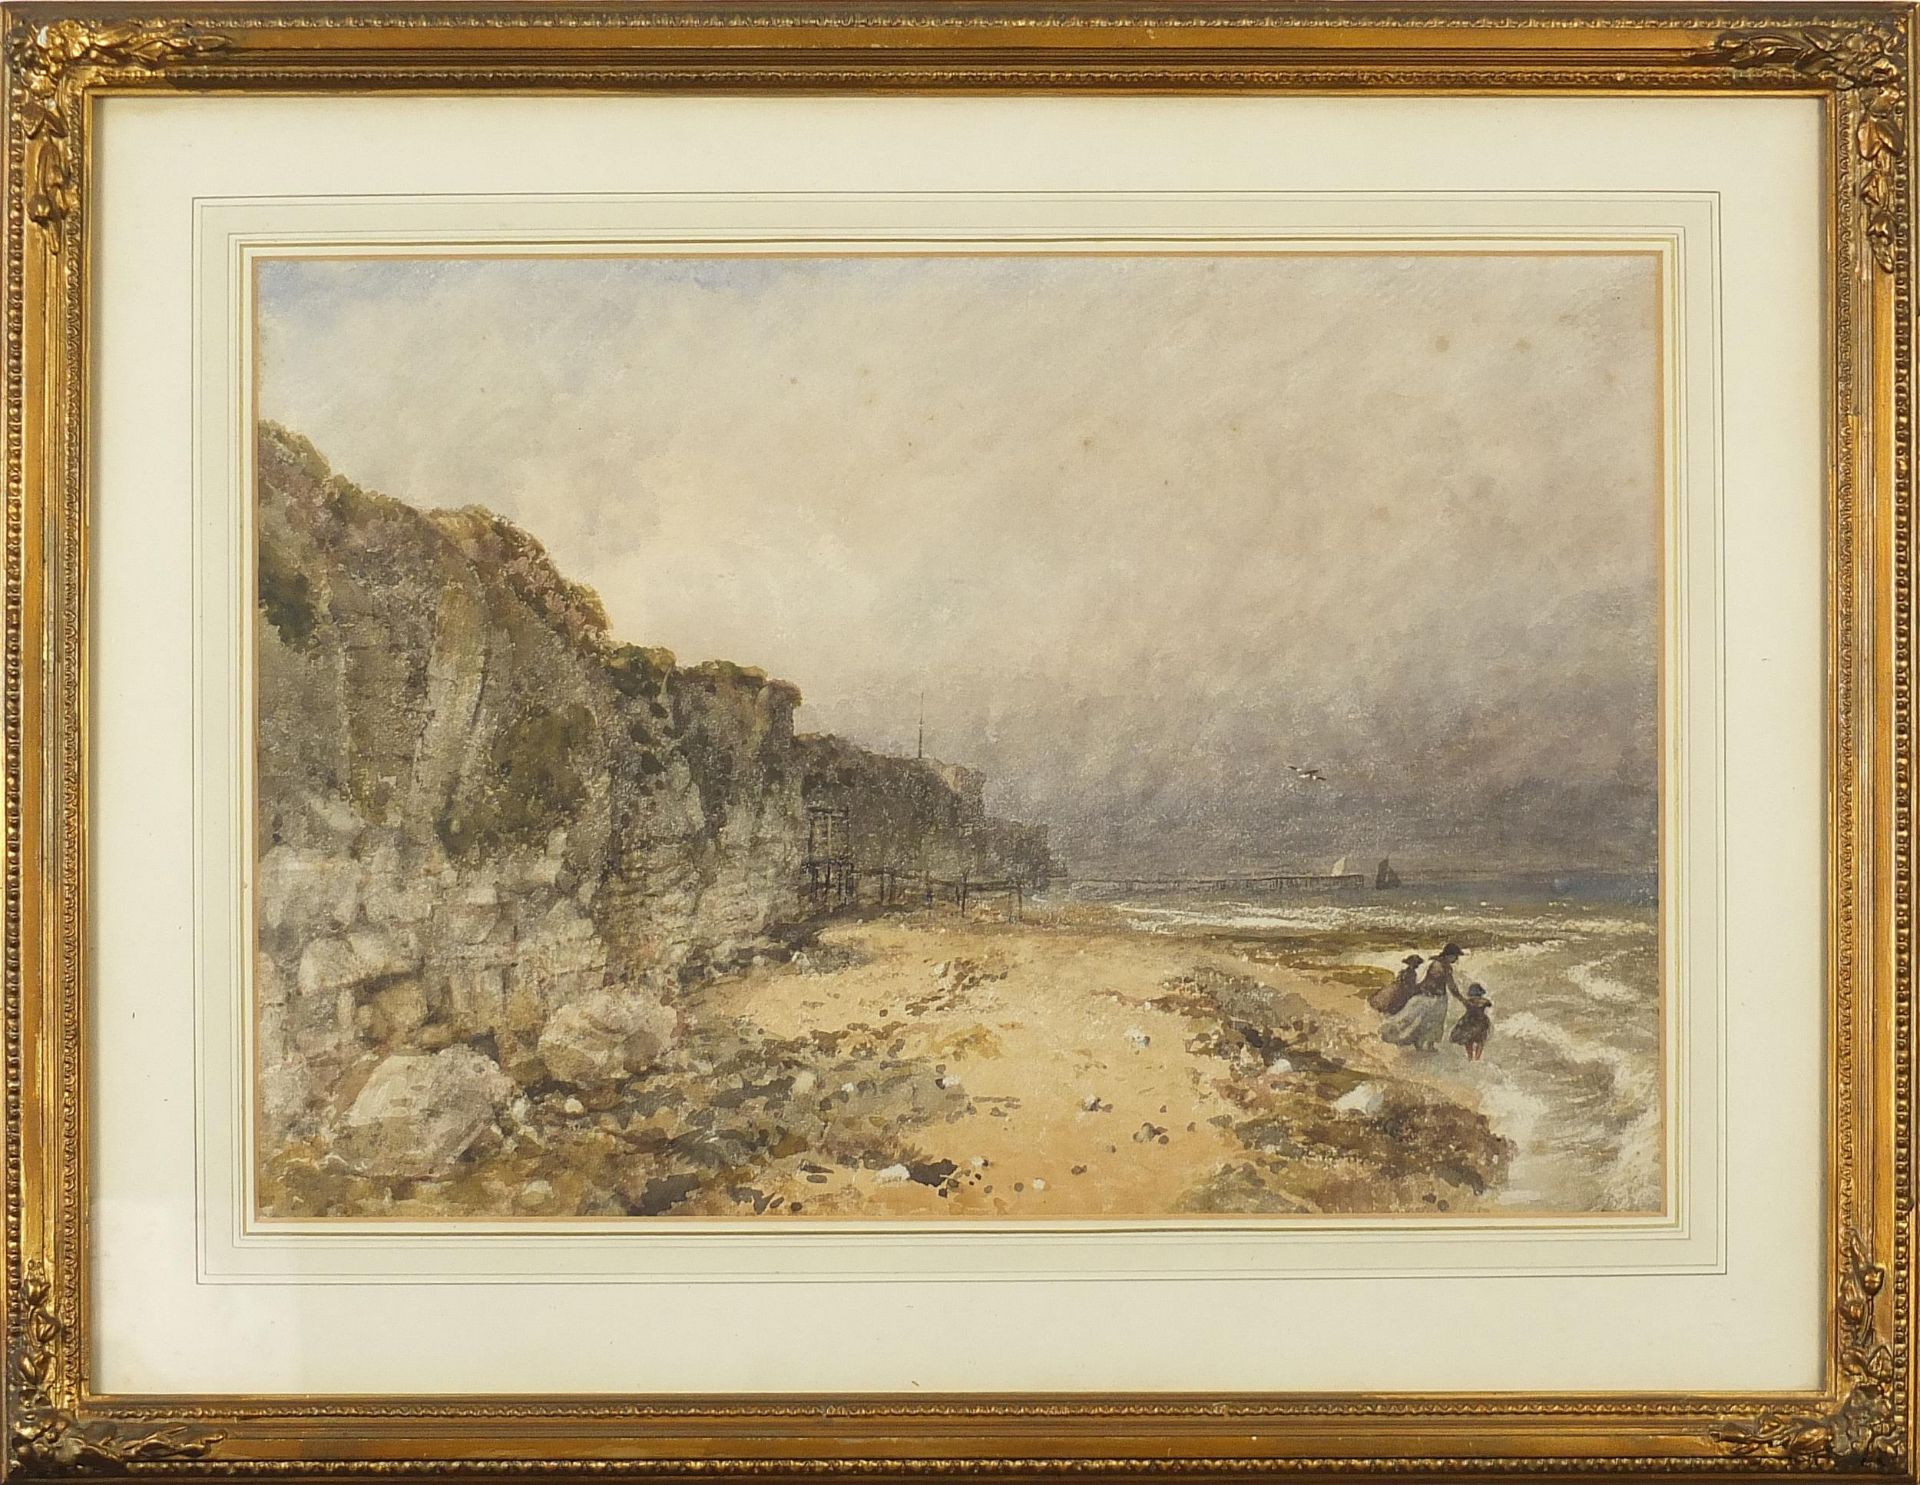 James Price - Stormy day, Dover coast, 19th century watercolour, inscribed verso, possibly Dover - Image 2 of 5